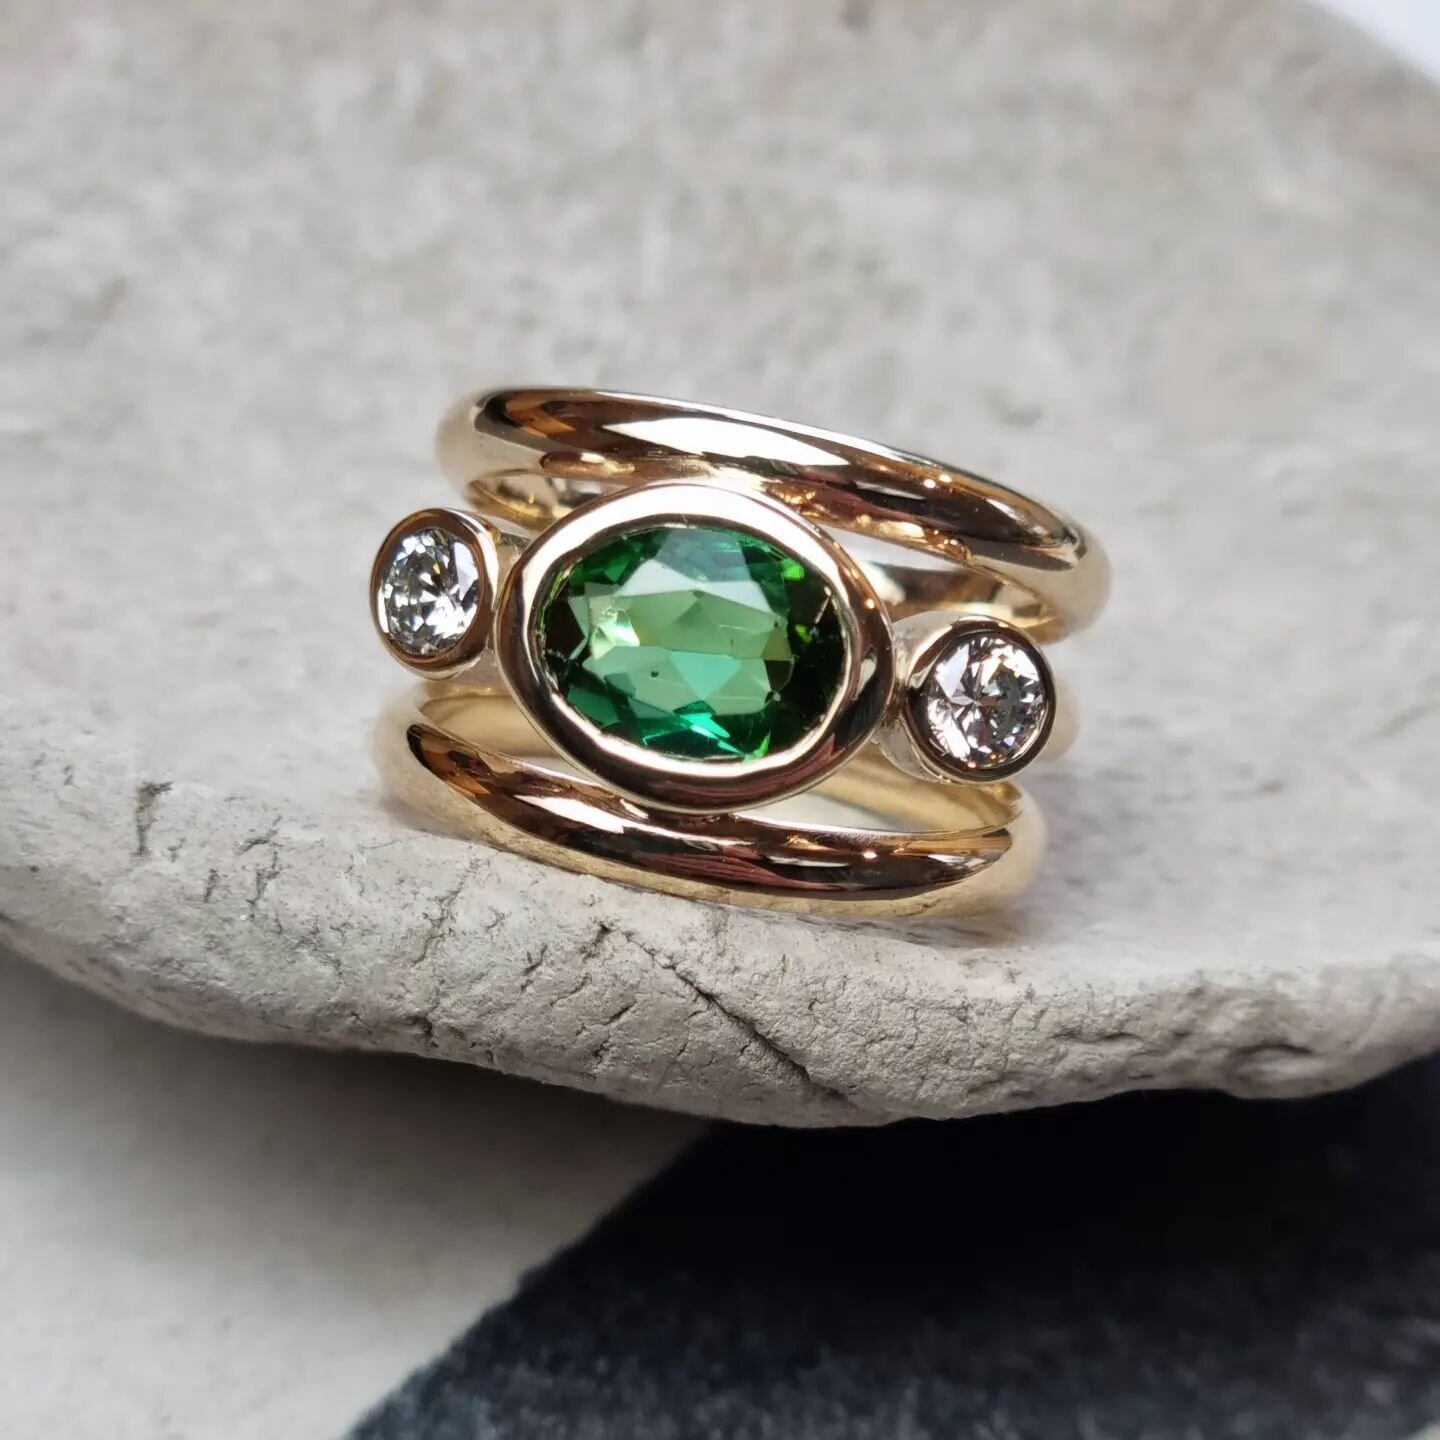 September was the month of the remodel! Customers own tourmaline, diamonds and gold..and quite a few solder joins! 
.
#newfromold #tourmaline #statementring #recycledgold #remodel #etsyseller #trilogyring #jewelleryremodelling #commission